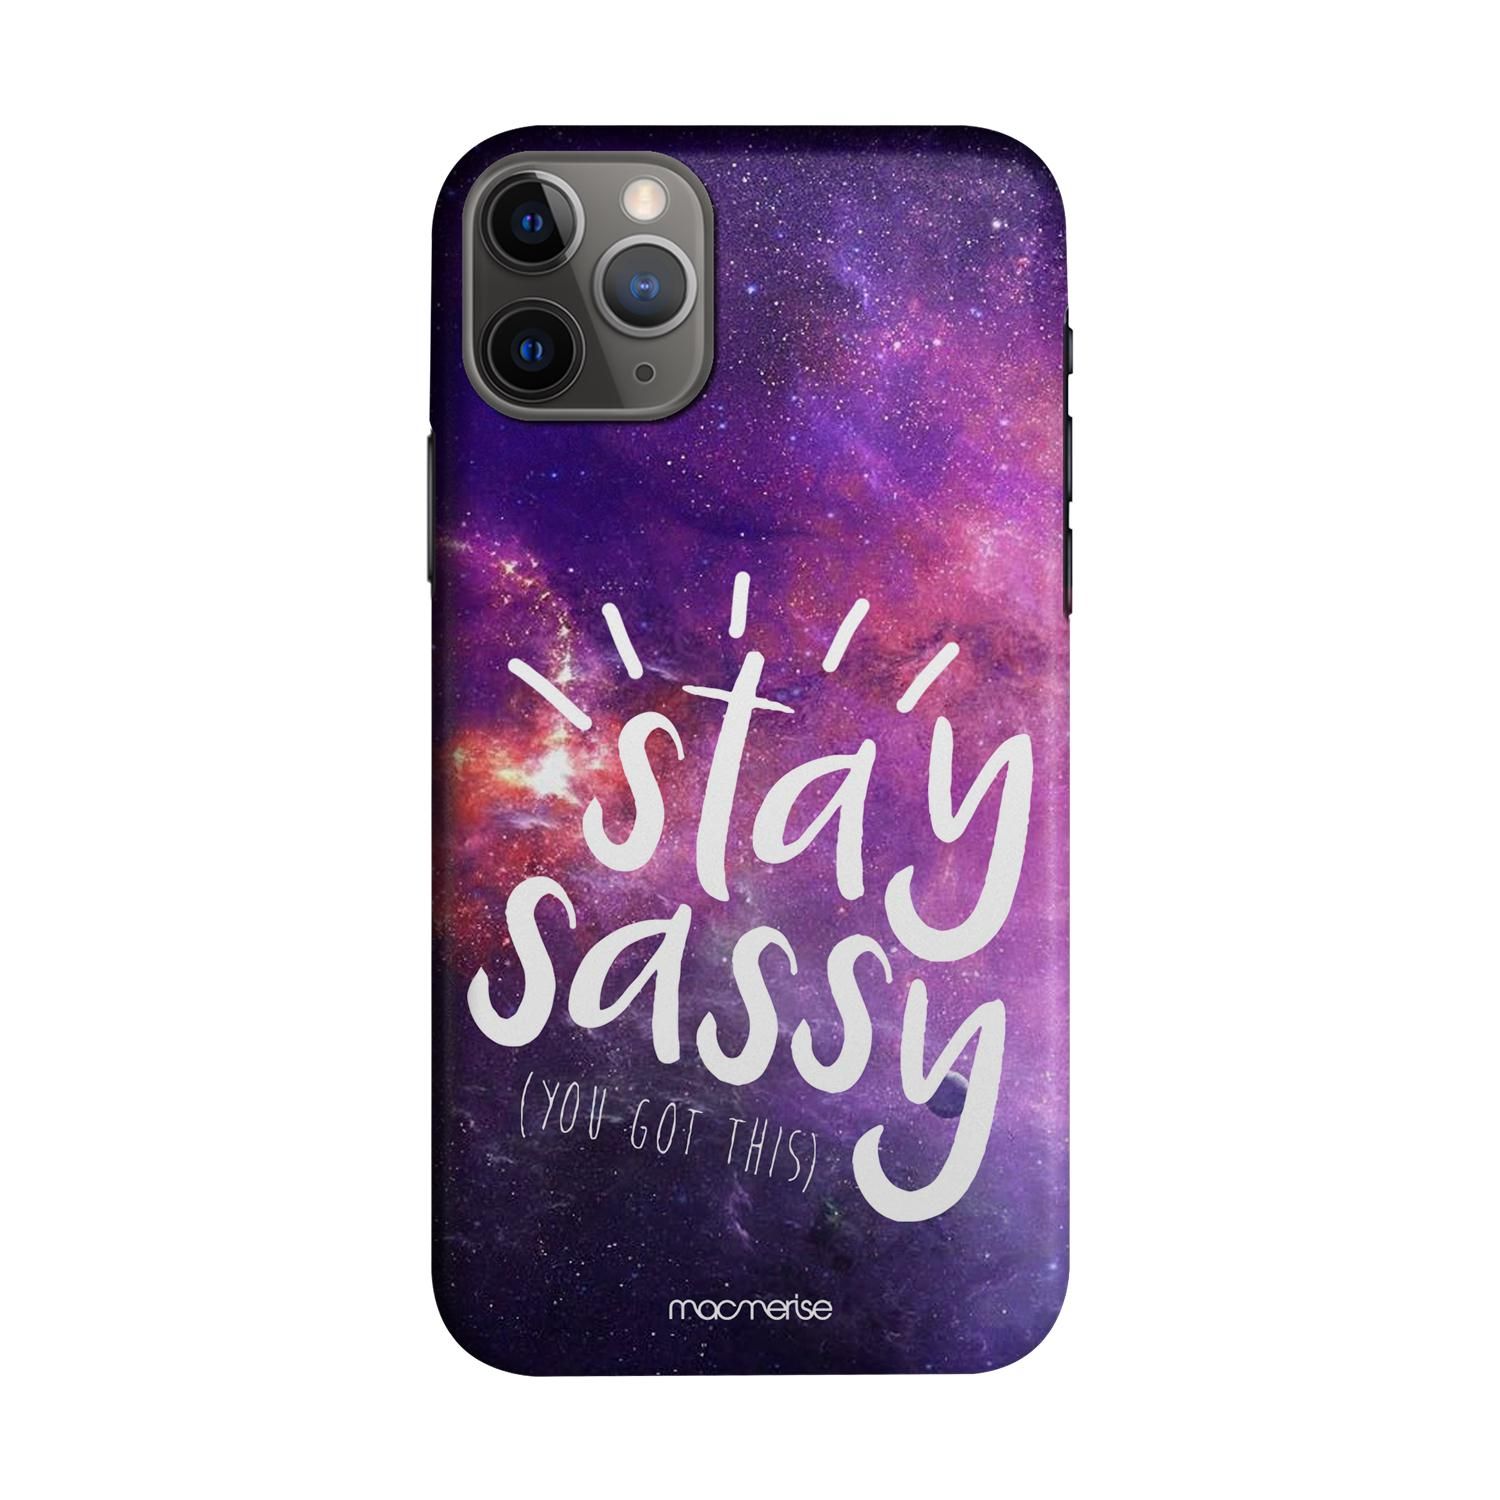 Stay Sassy - Sleek Phone Case for iPhone 11 Pro Max